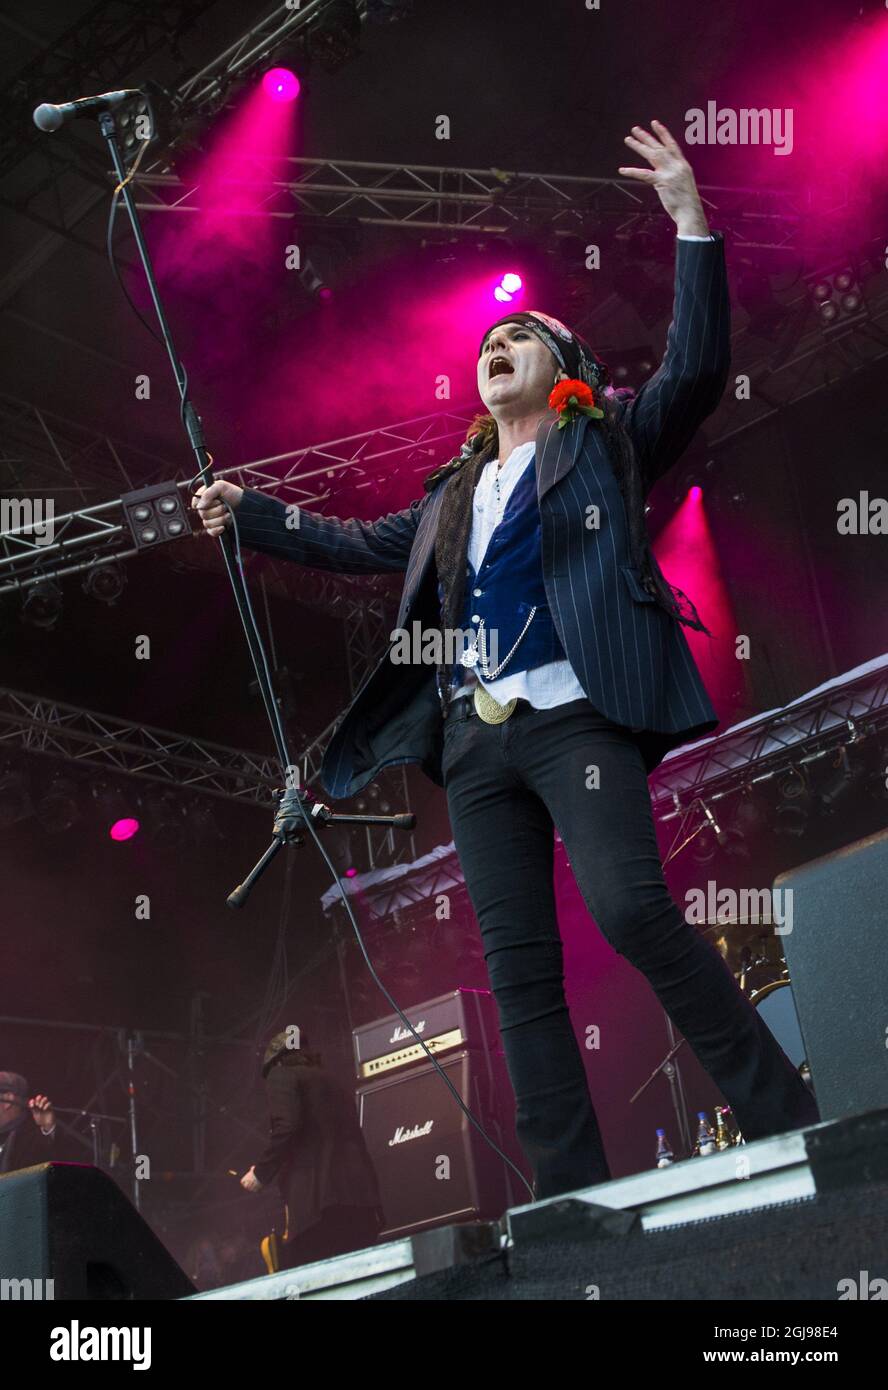 NORJE 20150603 Singer Spike of the English rockgroup 'Quireboys' performs during the 'Sweden Rock Festival' near Solvesborg, South Sweden, June 3, 2015. Foto: Claudio Bresciani / TT / Kod 10090  Stock Photo